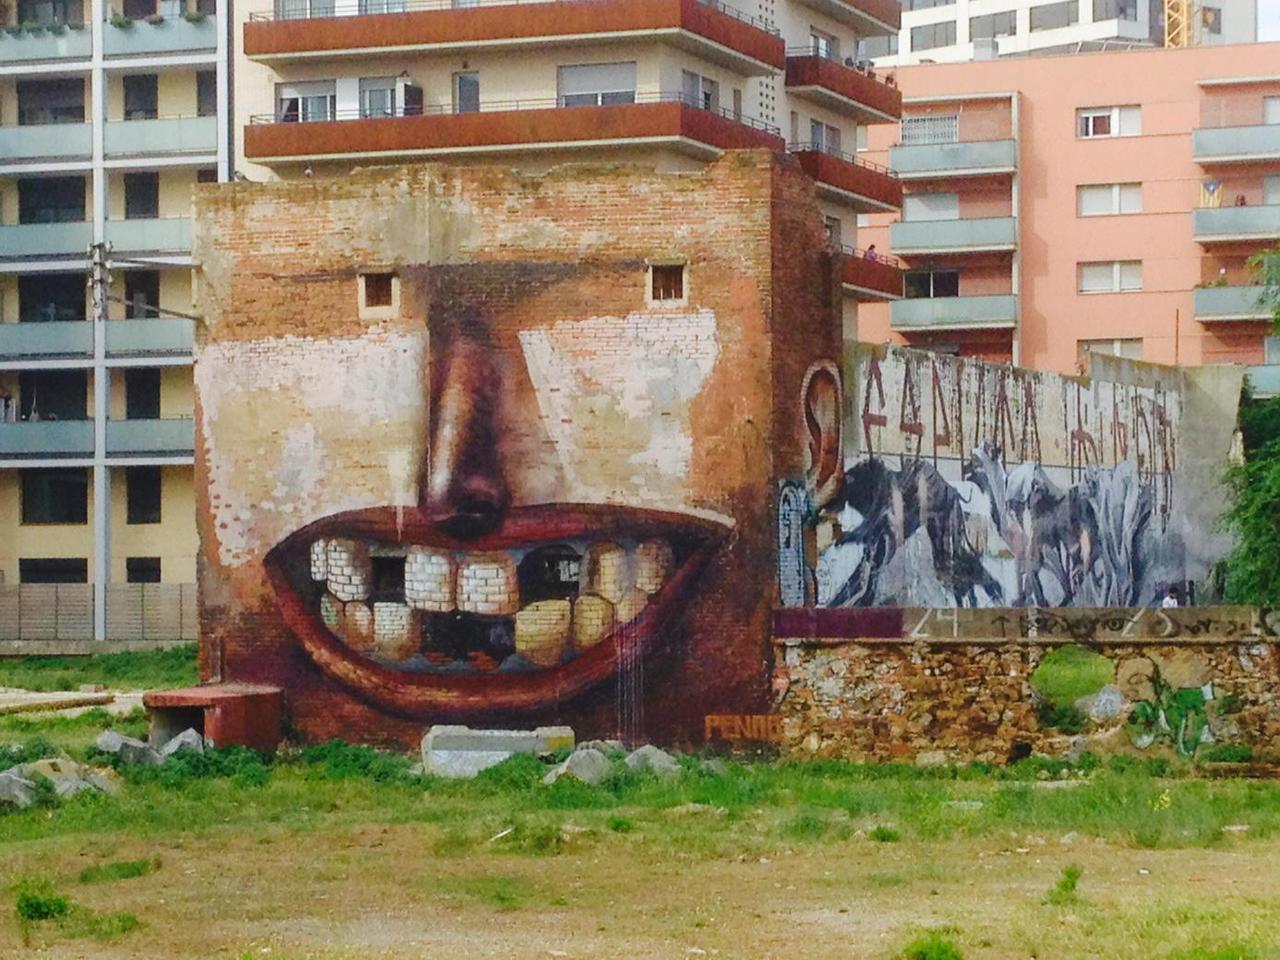 #penao #face check the ear on the side of the wall #sitespecific #graffiti #mural http://t.co/ME8wvTYcD3